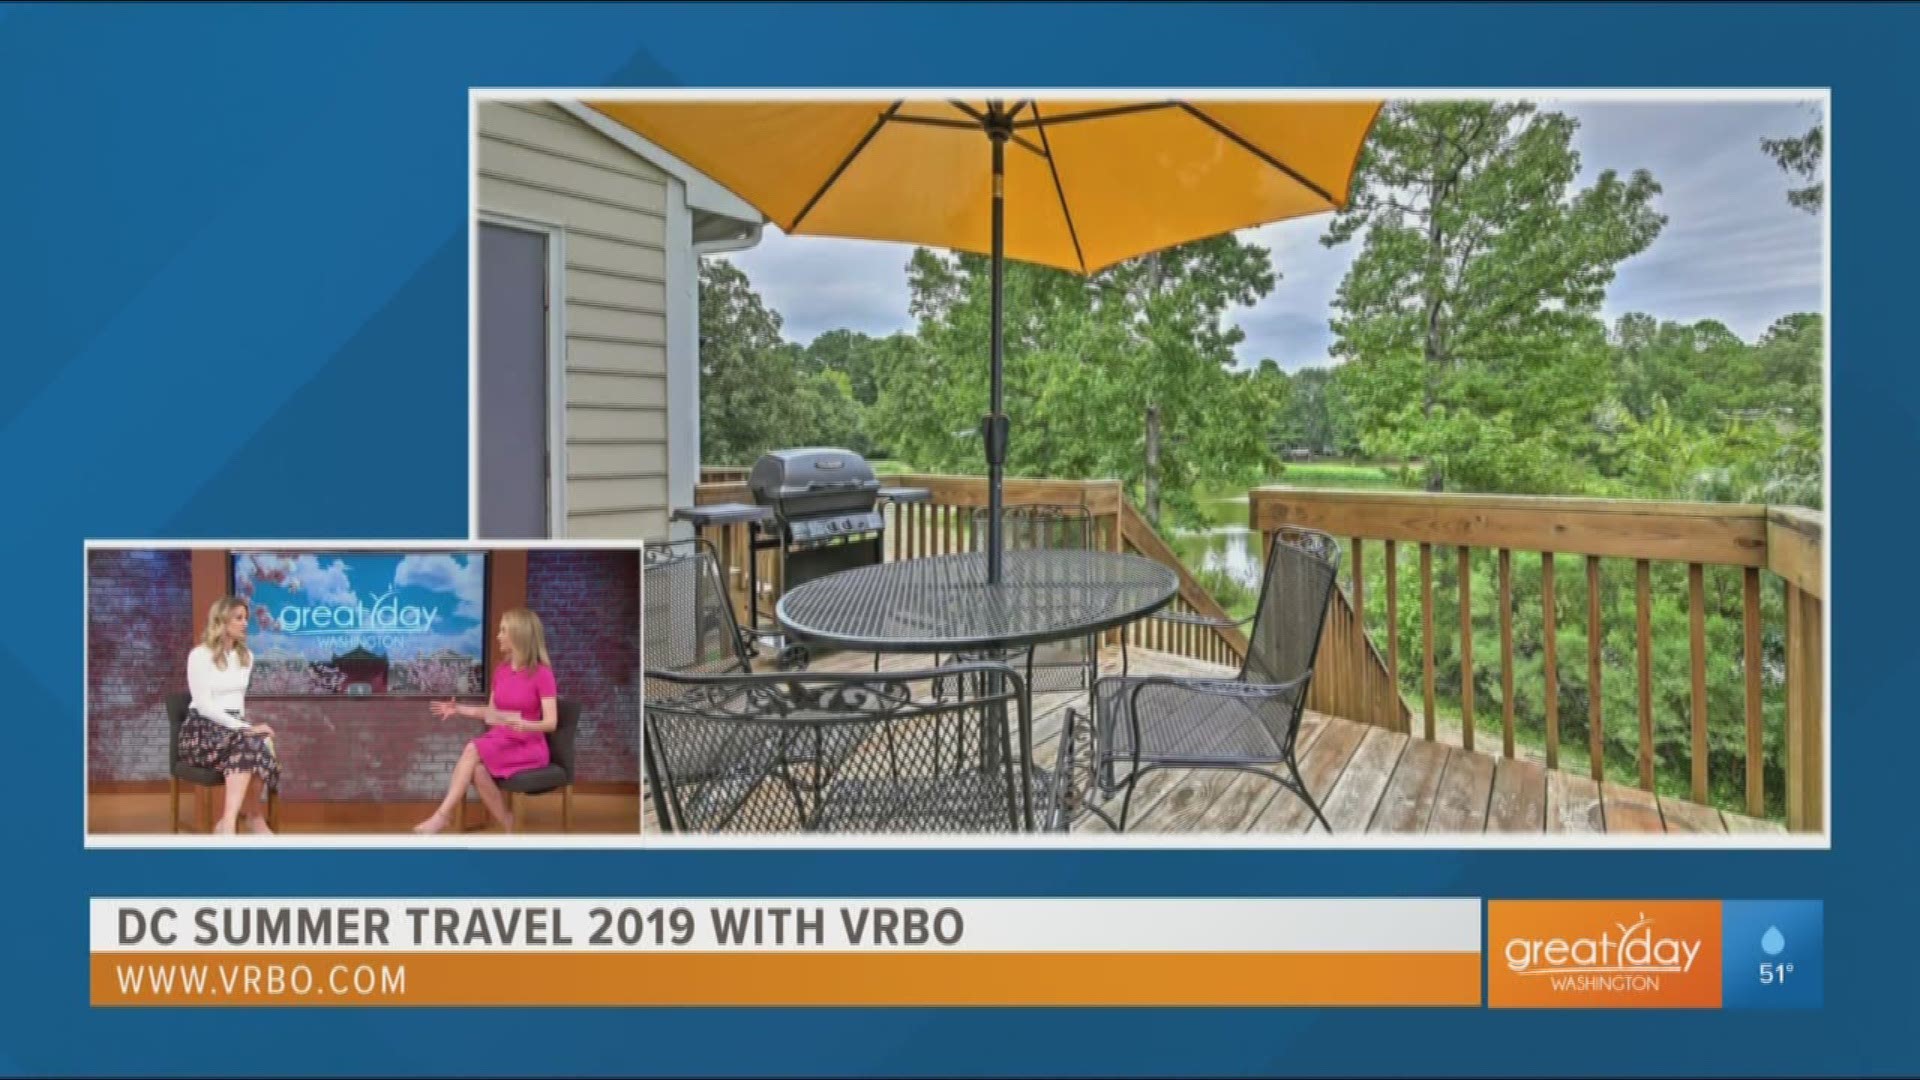 Melanie Fish from Vrbo explains how you can plan your next group getaway for as low as $32 per person per night.  Visit Vrbo.com for more information.  You can also get trip ideas on Great Day Washington's tripboard at https://vrbo.io/GreatDayWashington